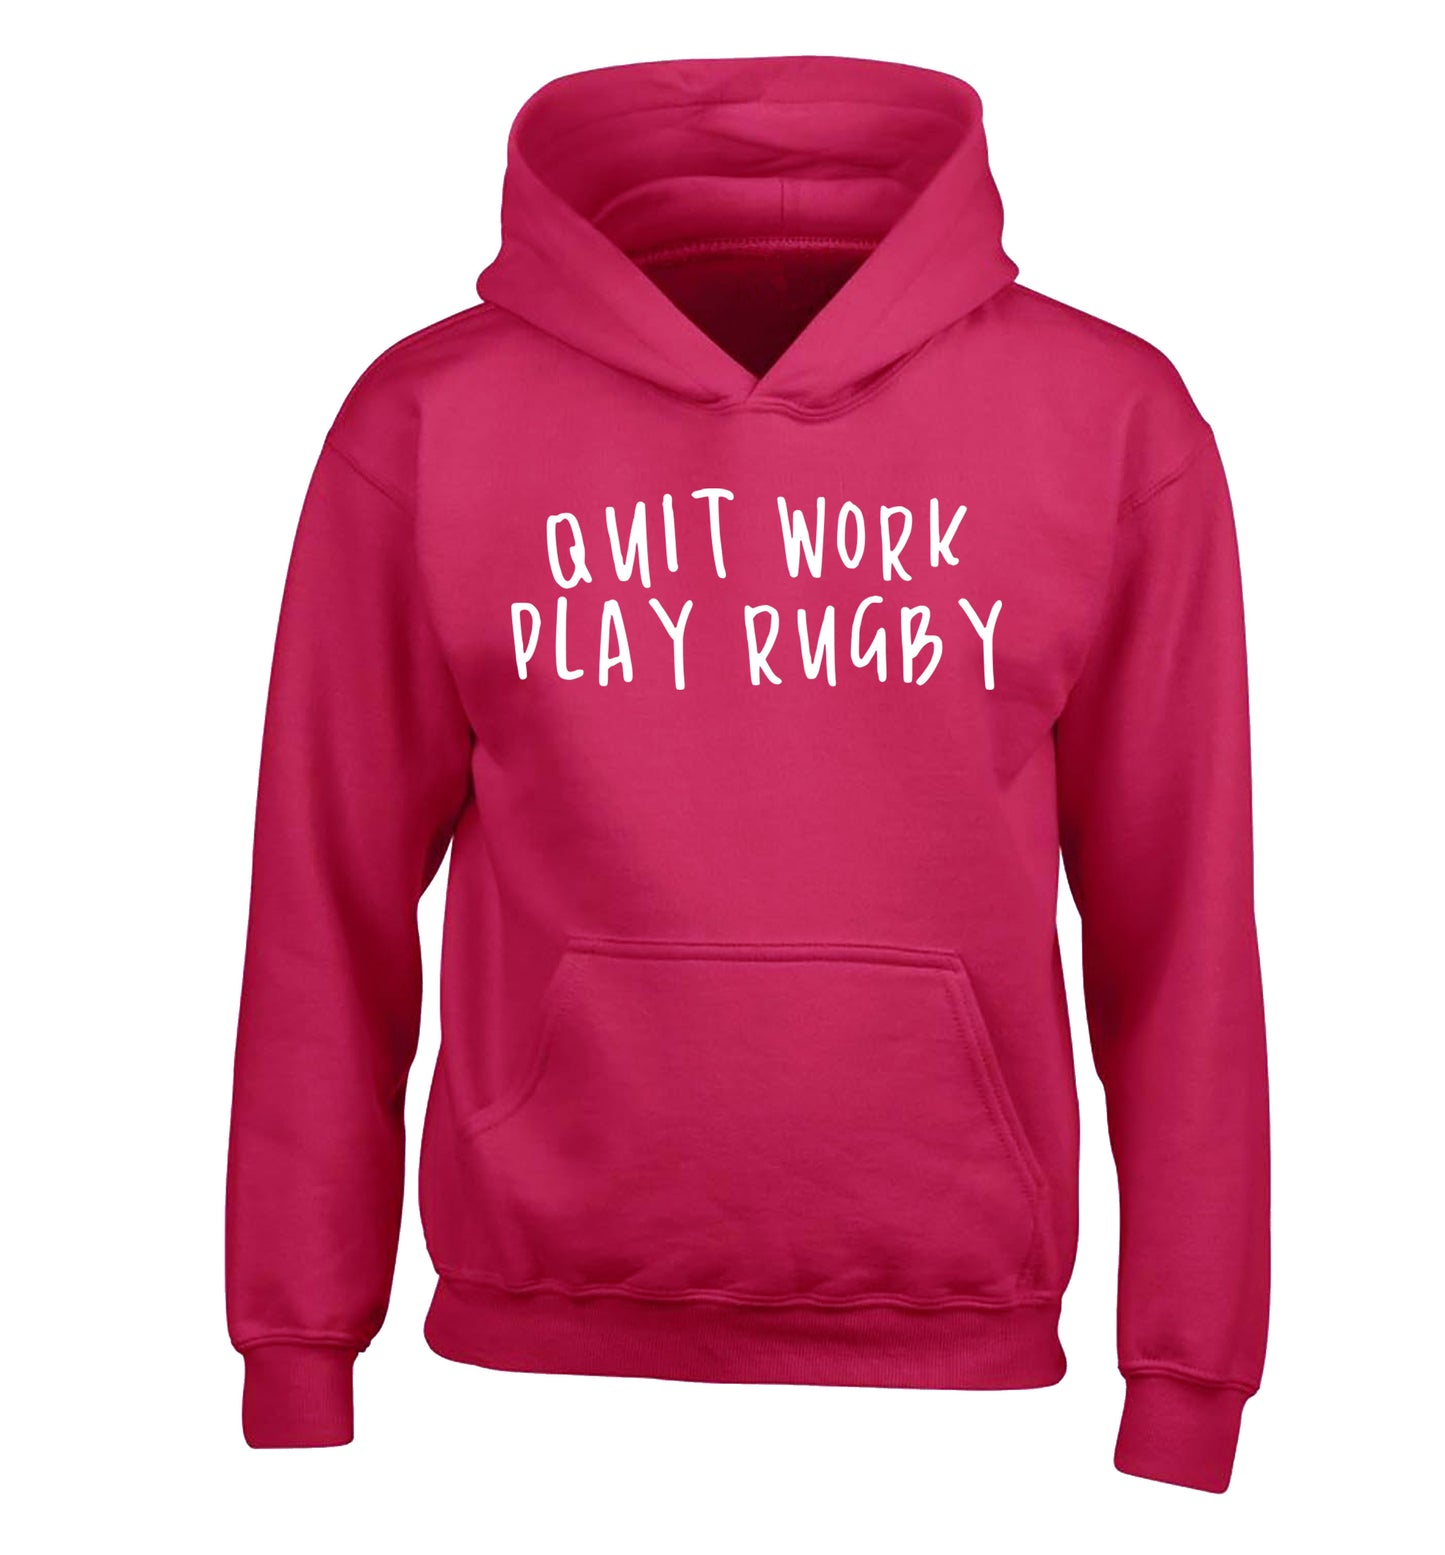 Quit work play rugby children's pink hoodie 12-13 Years